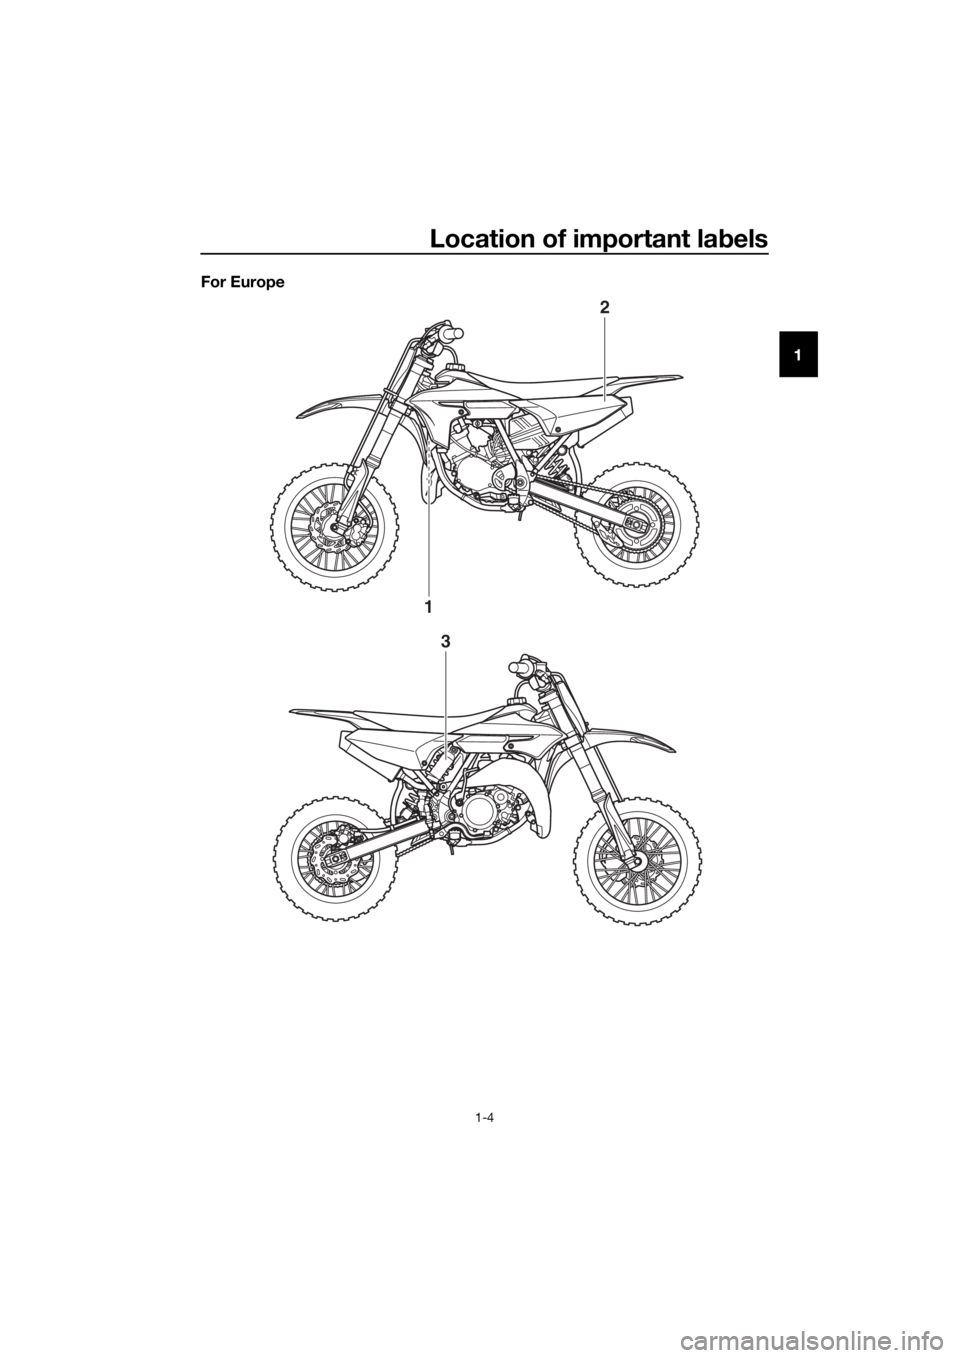 YAMAHA YZ65 2020 User Guide Location of important labels
1-4
1
For Europe
2
3
1
UBR881E0.book  Page 4  Tuesday, April 2, 2019  9:44 AM 